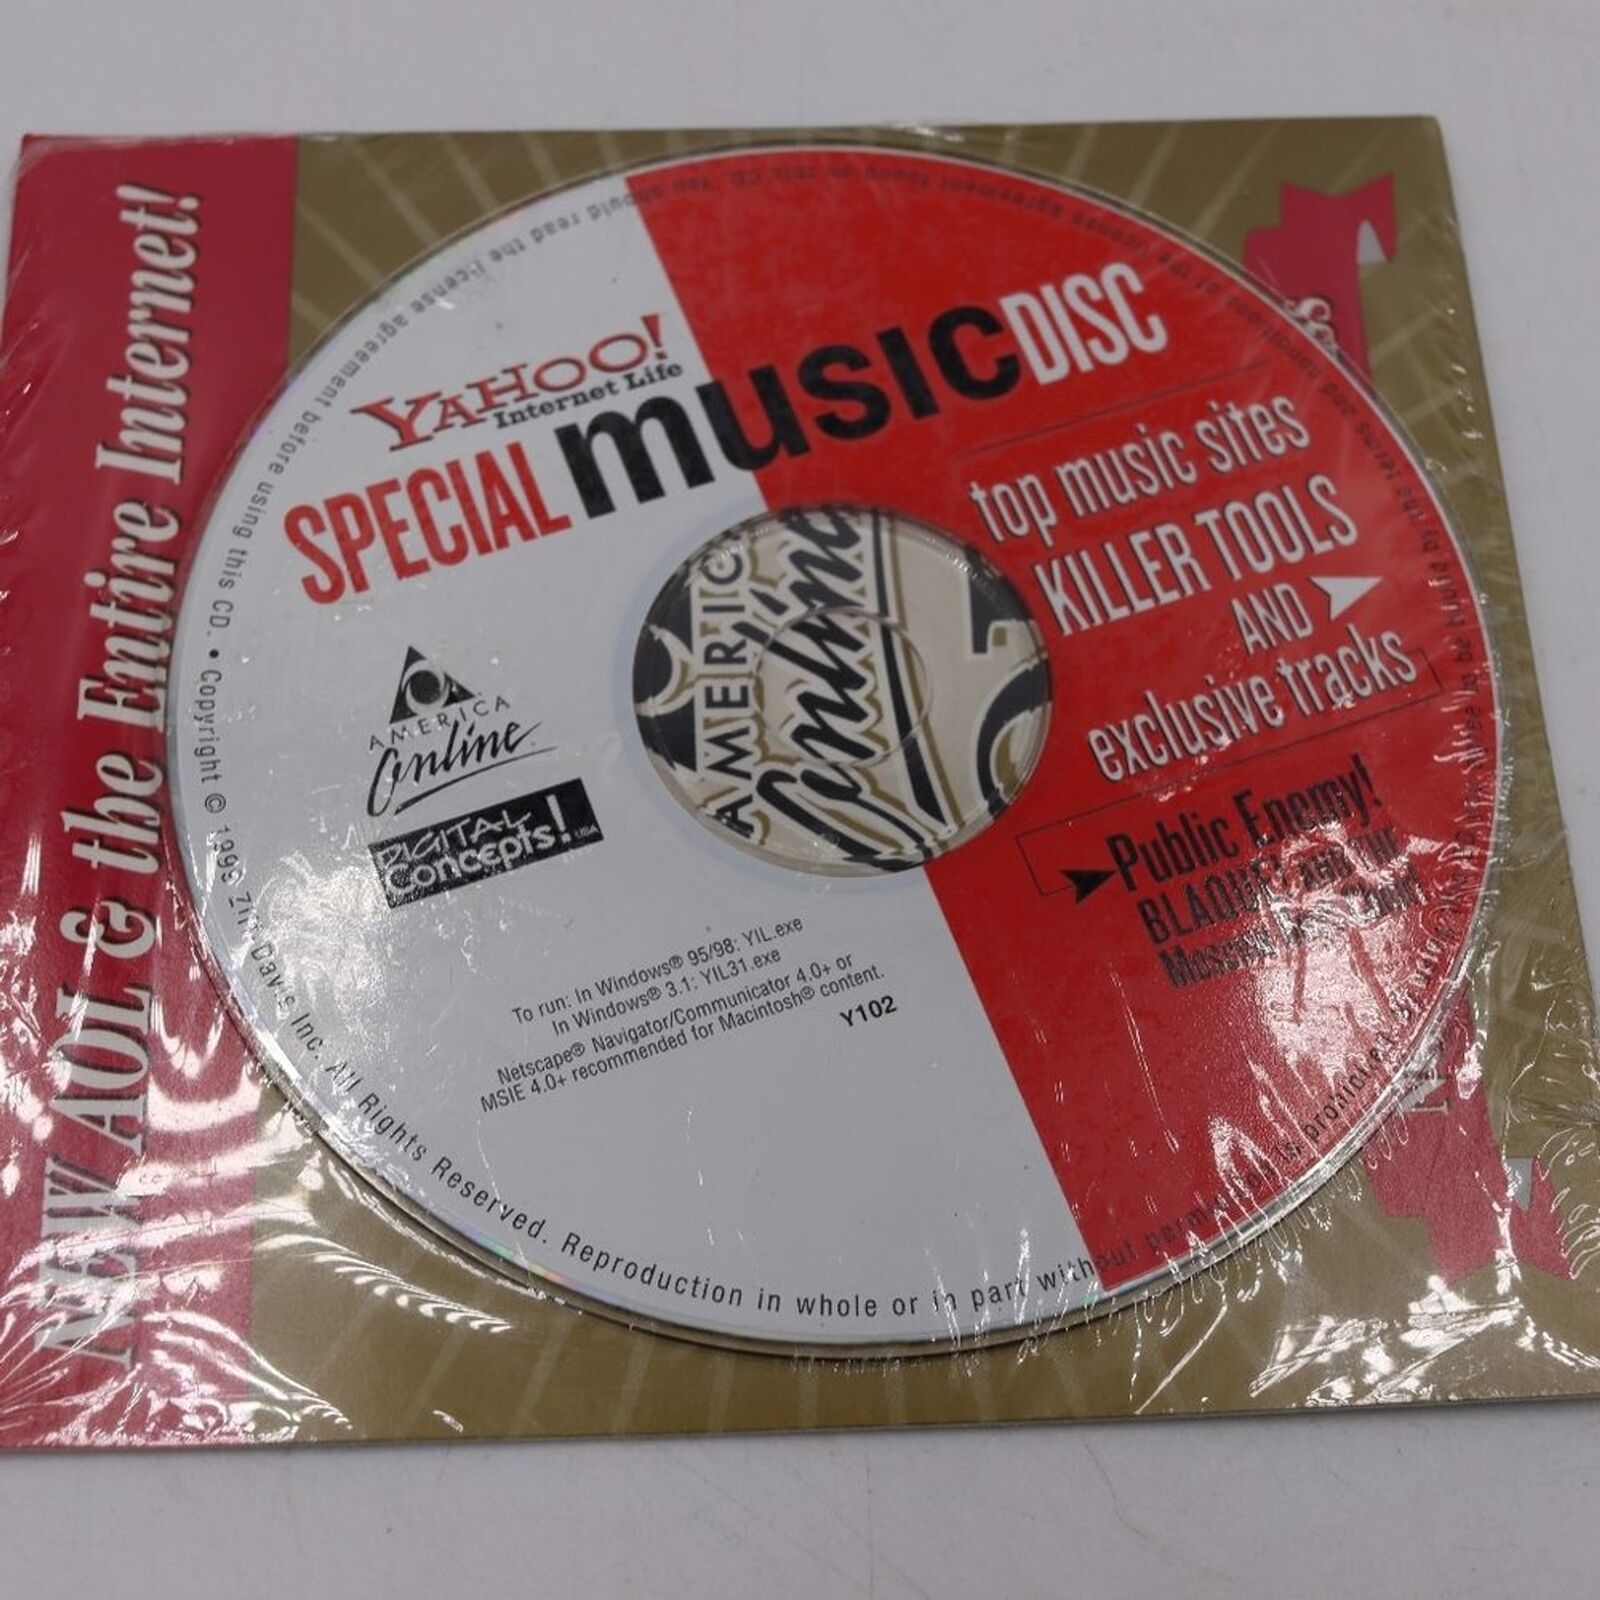 Yahoo internet Lite Special Music Vintage PC CD AOL 90s Sealed